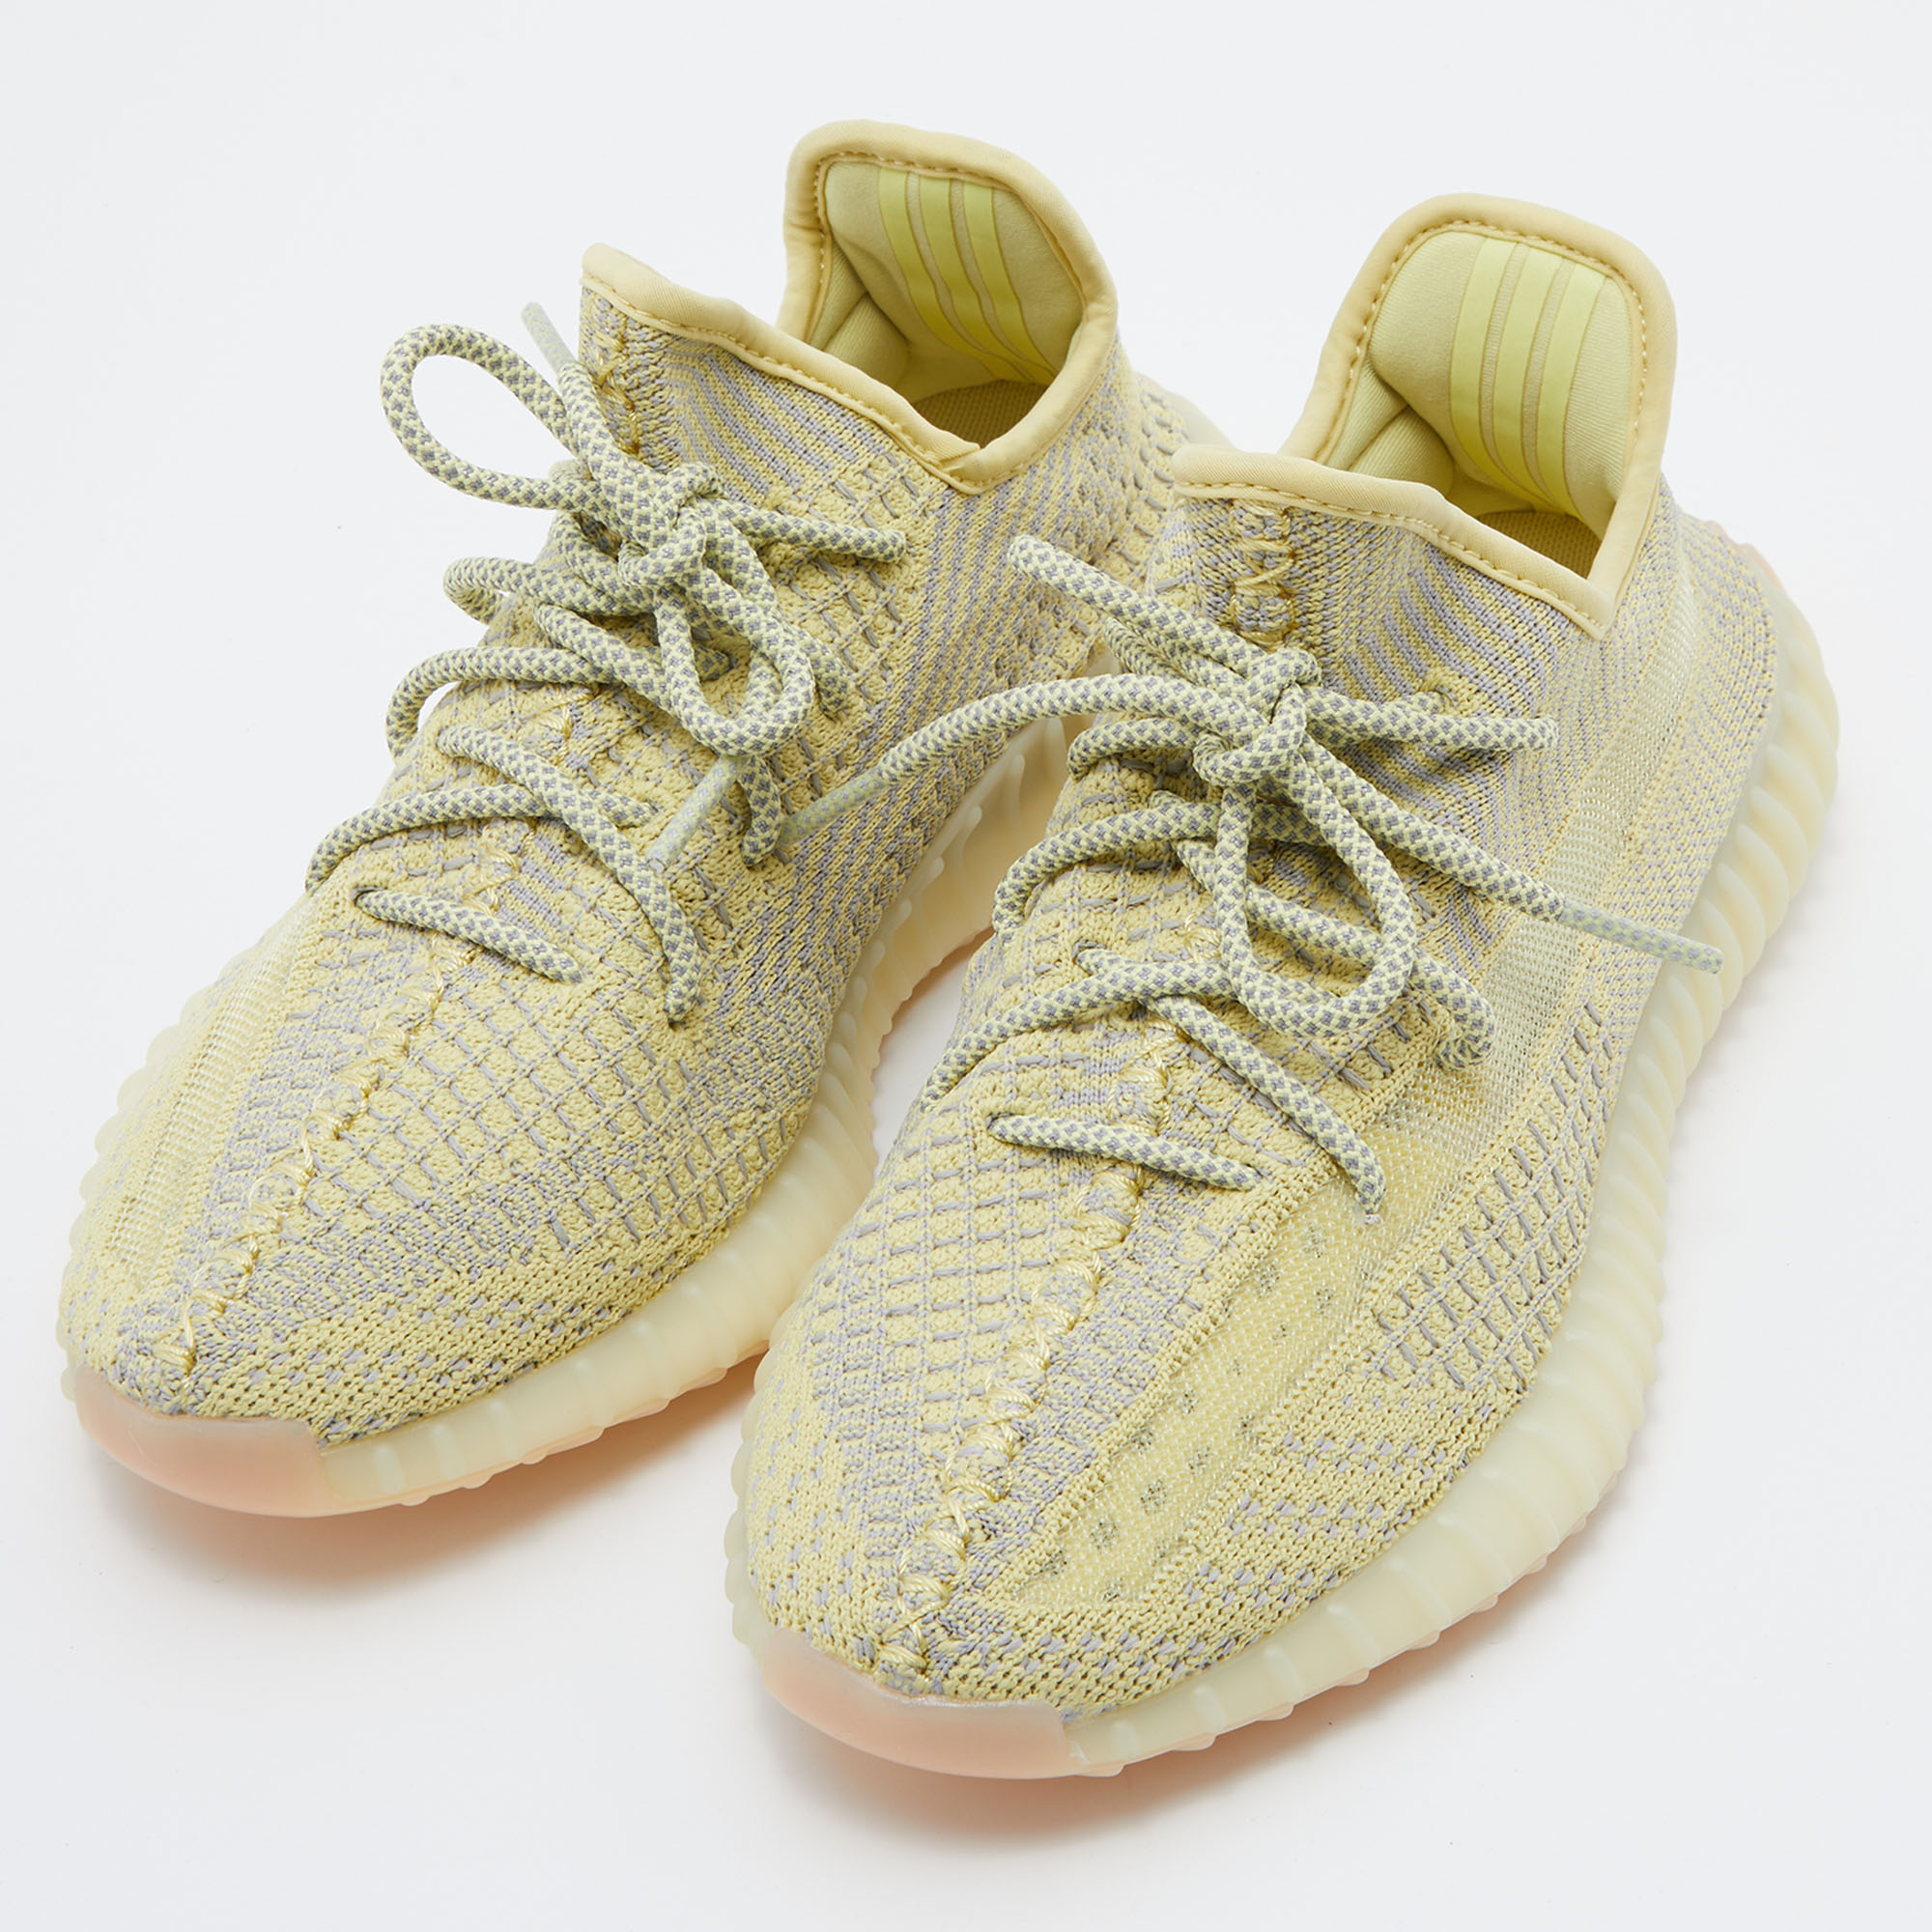 

Yeezy x Adidas Yellow/Grey Knit Fabric Boost 350 V2 Antlia Non-Reflective Sneakers Size 39 1/3